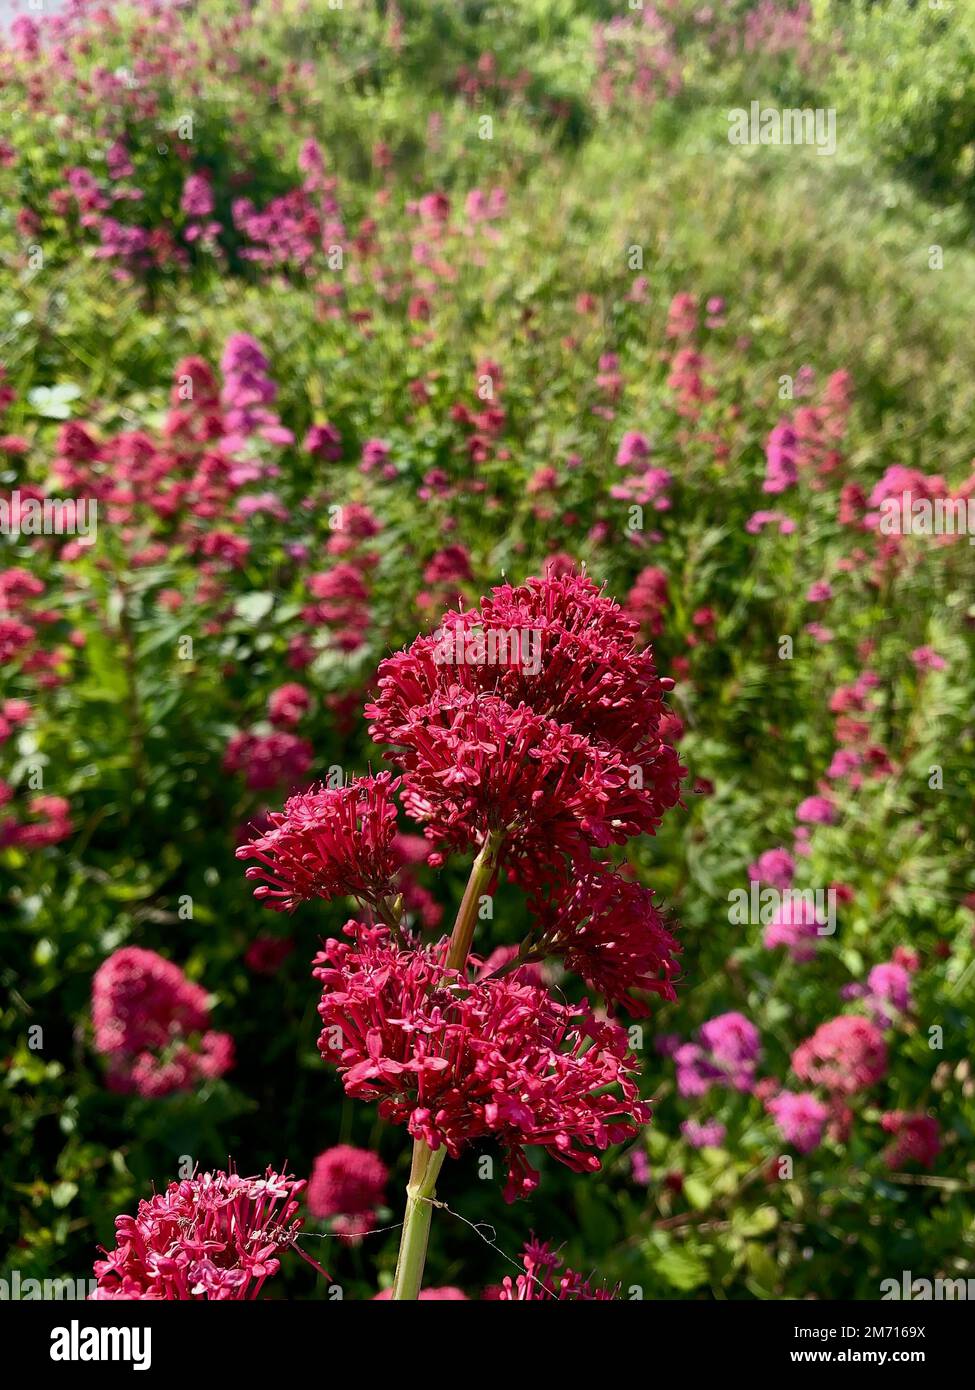 A vertical shot of a delicate Red valerian (Centranthus ruber) with the flowers in the blurred background Stock Photo